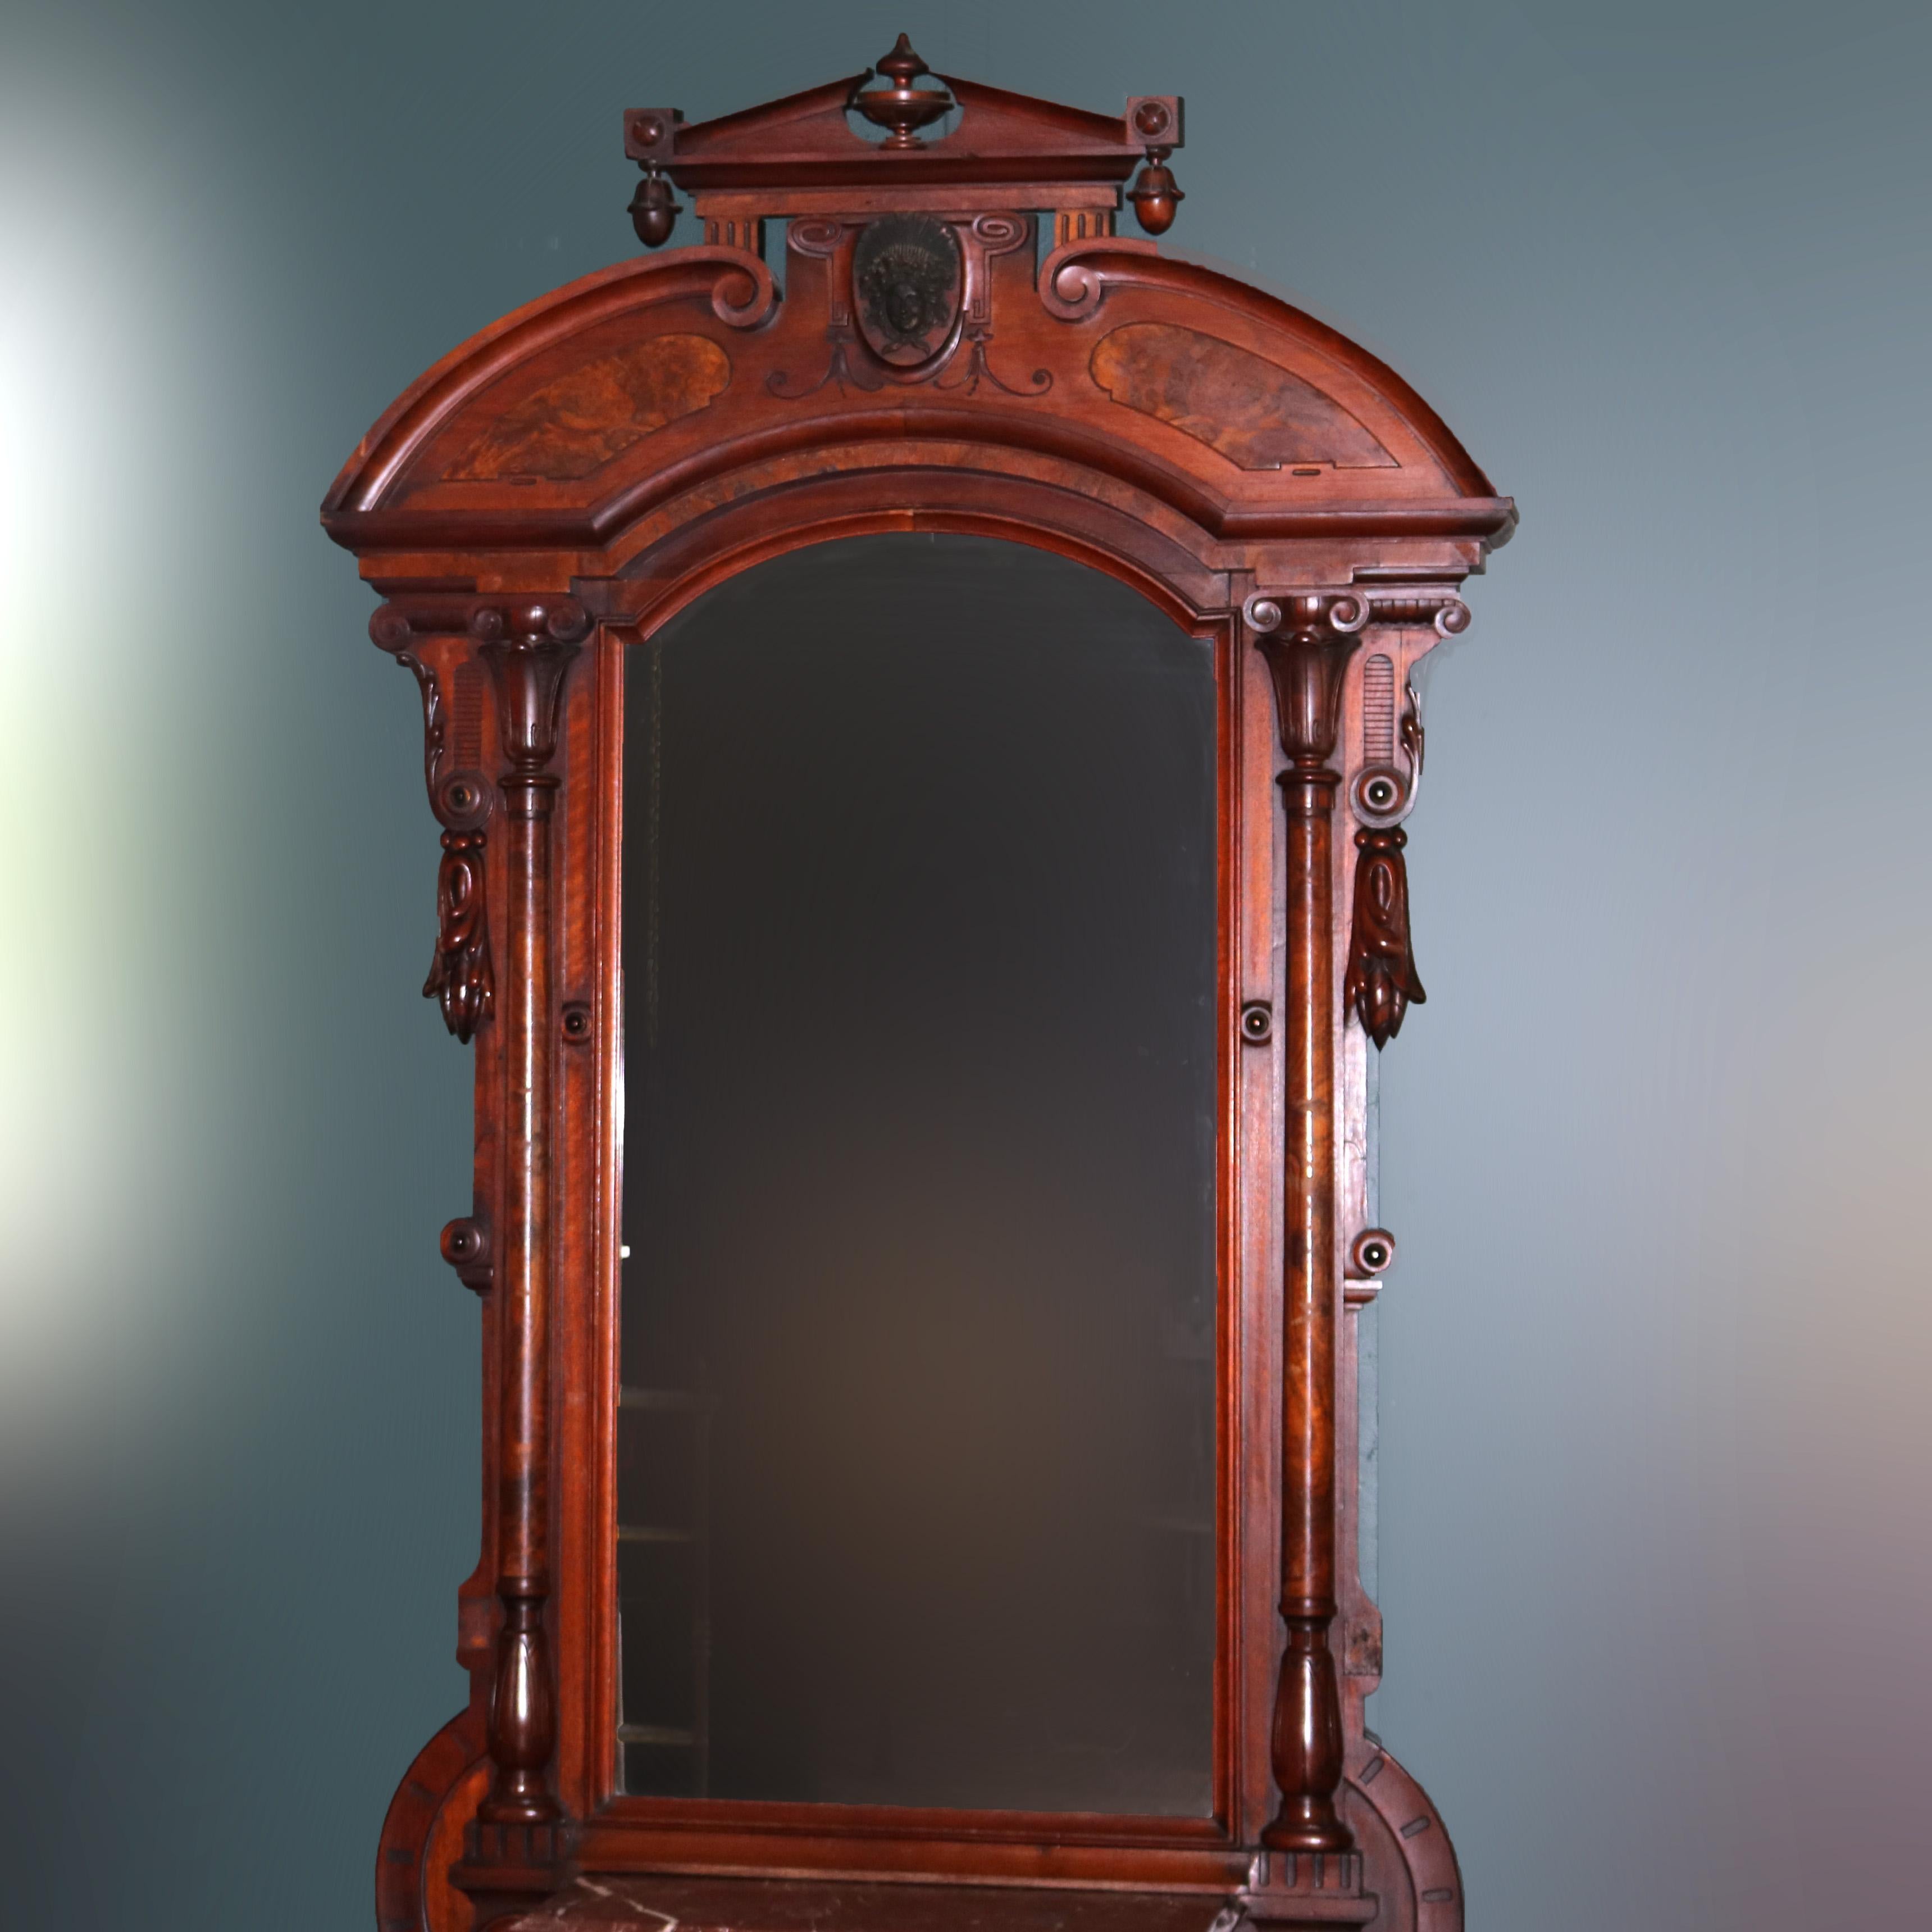 A monumental pier mirror by John Jelliff offers walnut and burl construction with broken arch crest having central urn, carved mask, and drop finials surmounting mirror with flanking columns, tassels, scroll and foliate elements over marble top base